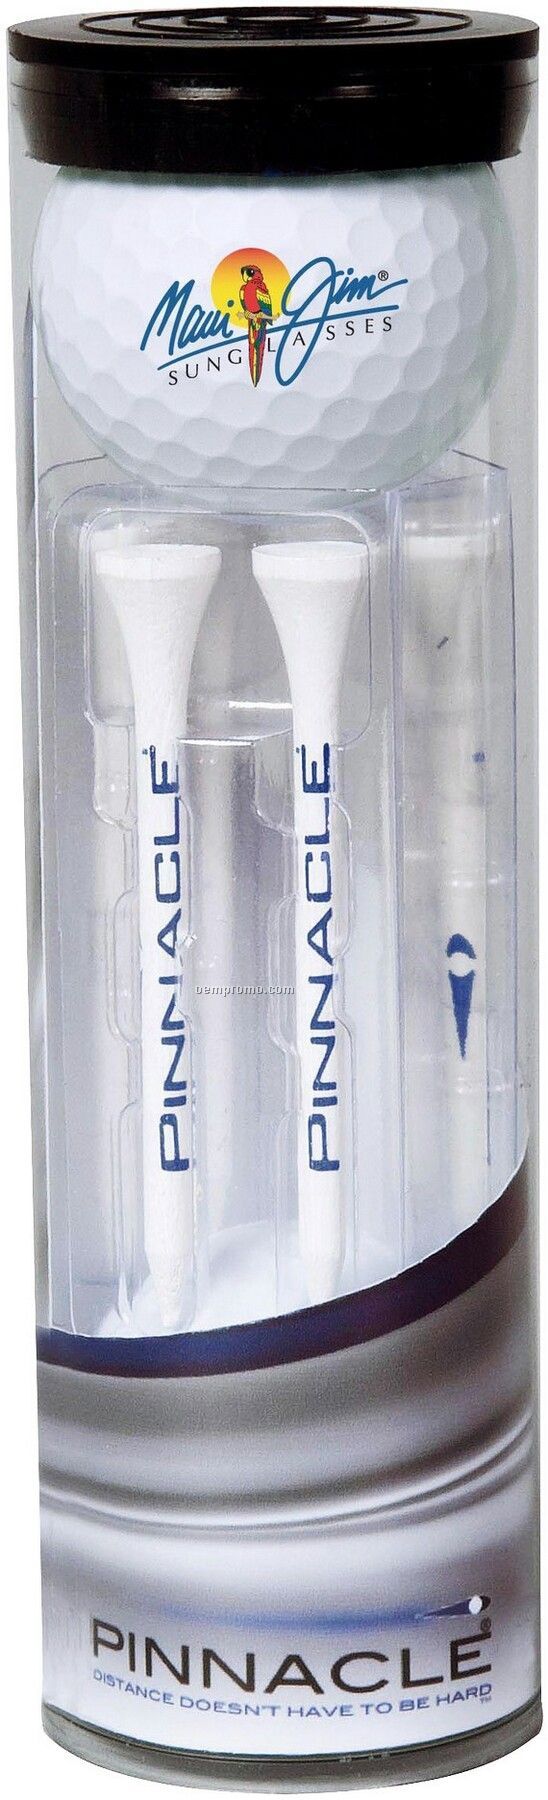 Pinnacle Gold Distance (2011) 2-ball Promo Pack Tube W/ 6 Tees